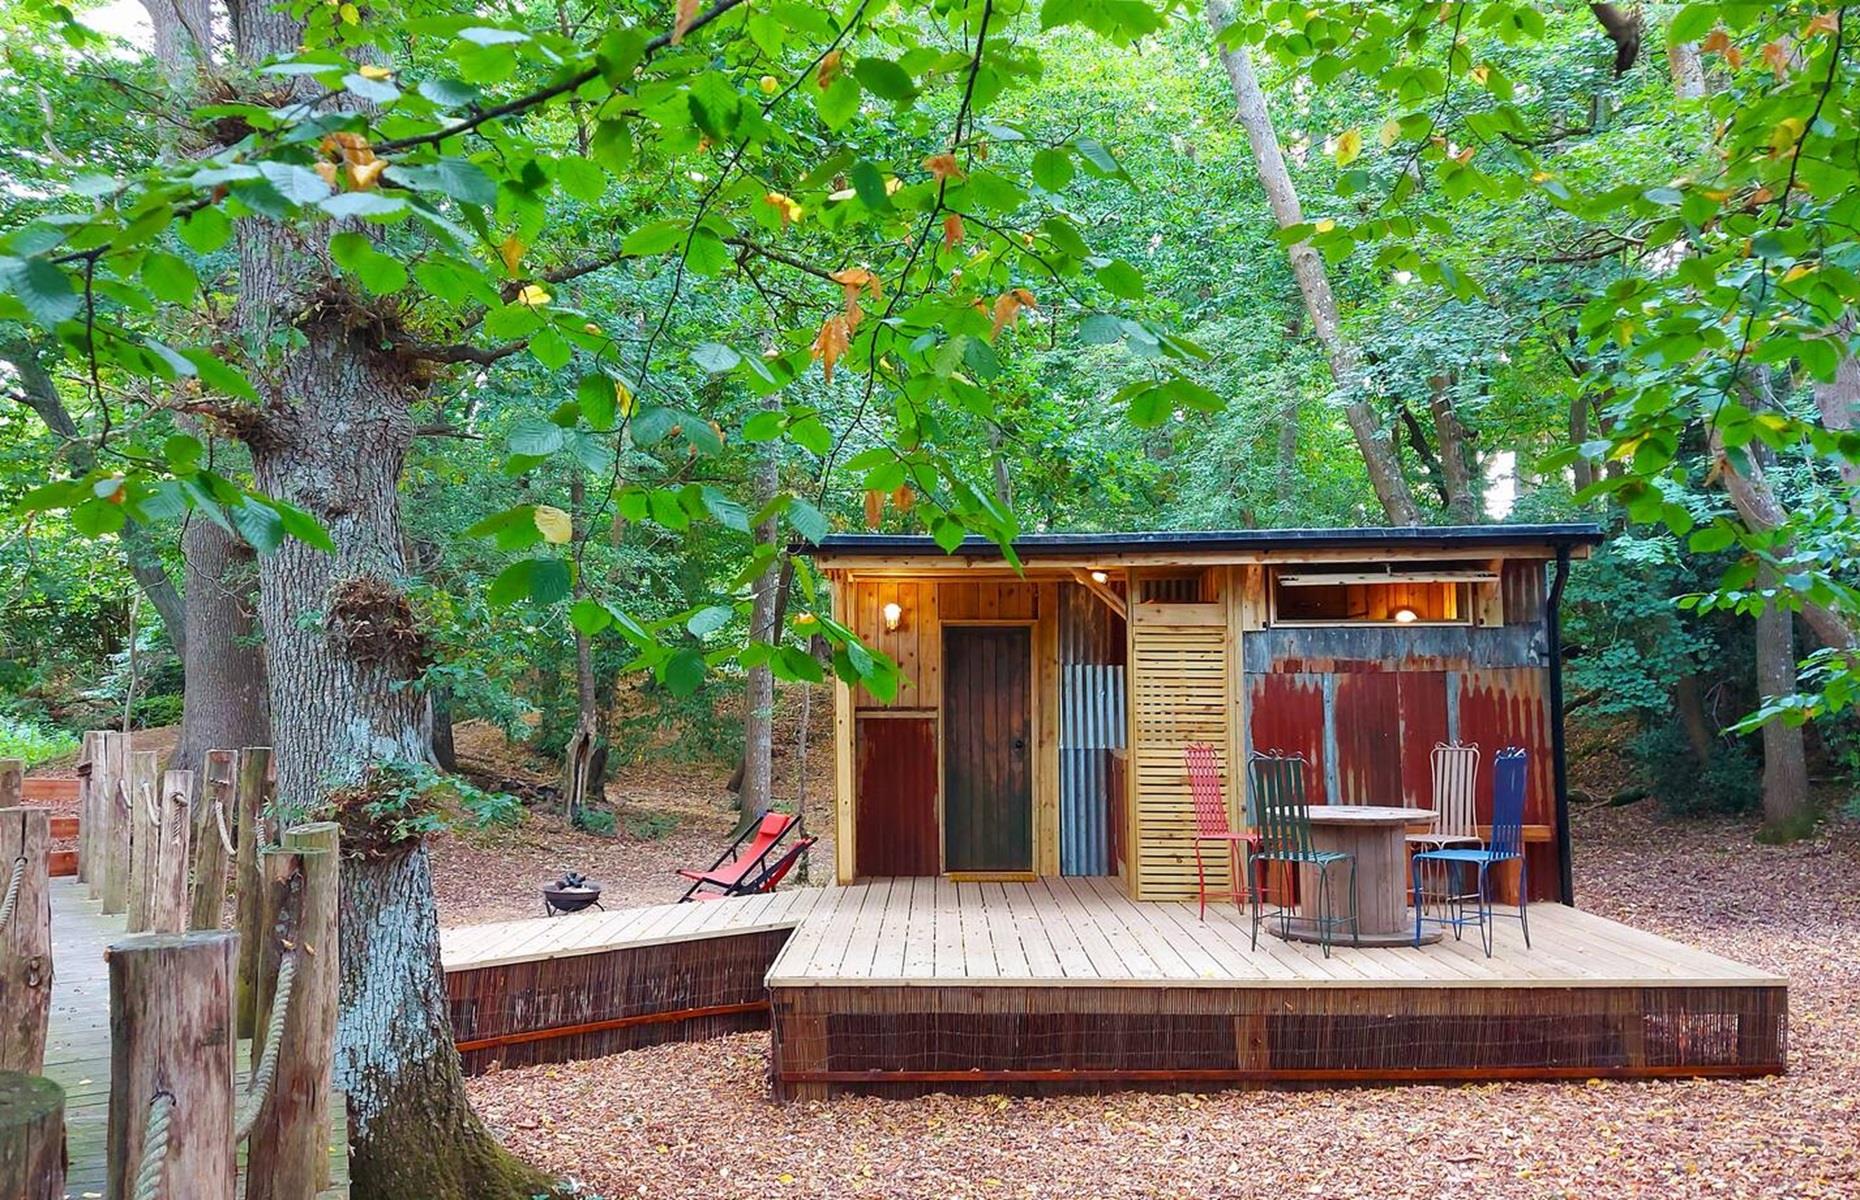 <p>Known as Browns Shack, this handmade cabin lies in the Rother district of East Sussex, England, in a leafy woodland. Described on the <a href="https://www.airbnb.co.in/rooms/684782634554494141?source_impression_id=p3_1707894175_5vym8GzdiIOJpUlK">Airbnb listing</a> as both quirky and rustic, the small wooden hut comes with everything you could need for a comfortable weekend away.</p>